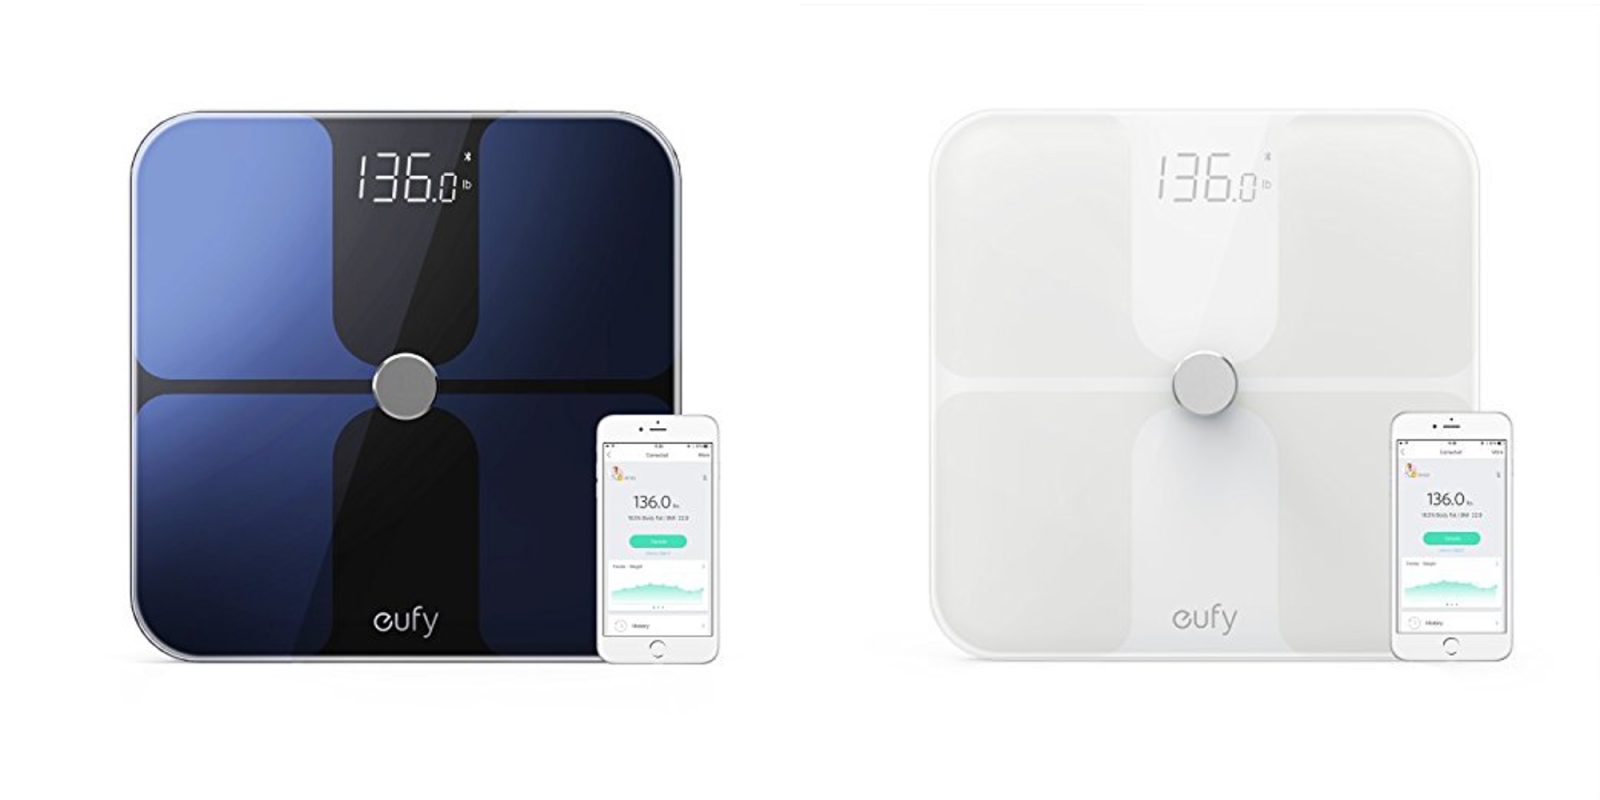 https://www.lululook.com/cdn/shop/articles/1515498858_ankers-eufy-bodysense-bmi-smart-scale-for-ios-android-now-36-on-amazon-reg-50_1600x.jpg?v=1598962052